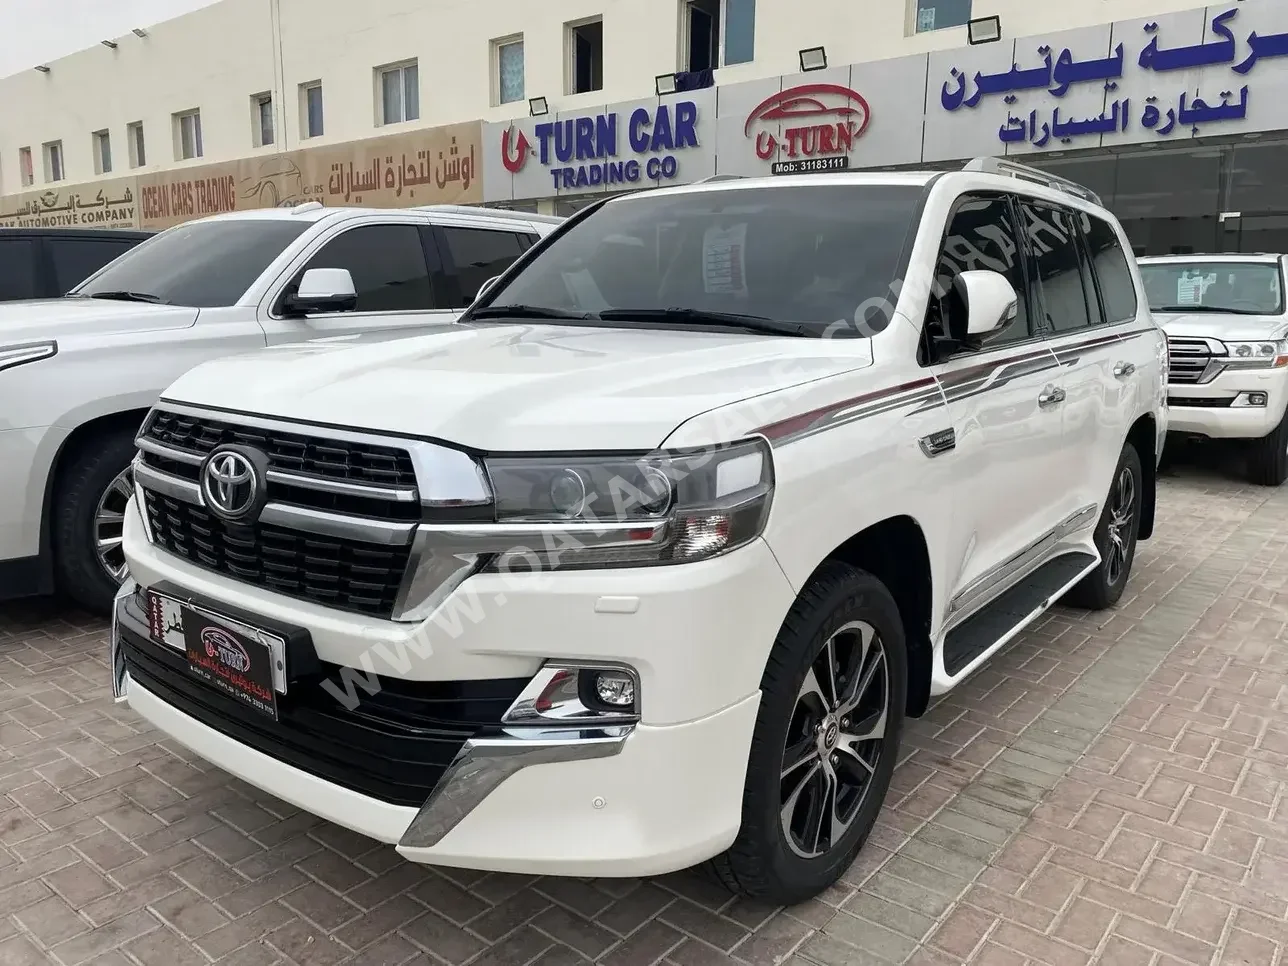 Toyota  Land Cruiser  GXR- Grand Touring  2021  Automatic  103,000 Km  6 Cylinder  Four Wheel Drive (4WD)  SUV  White